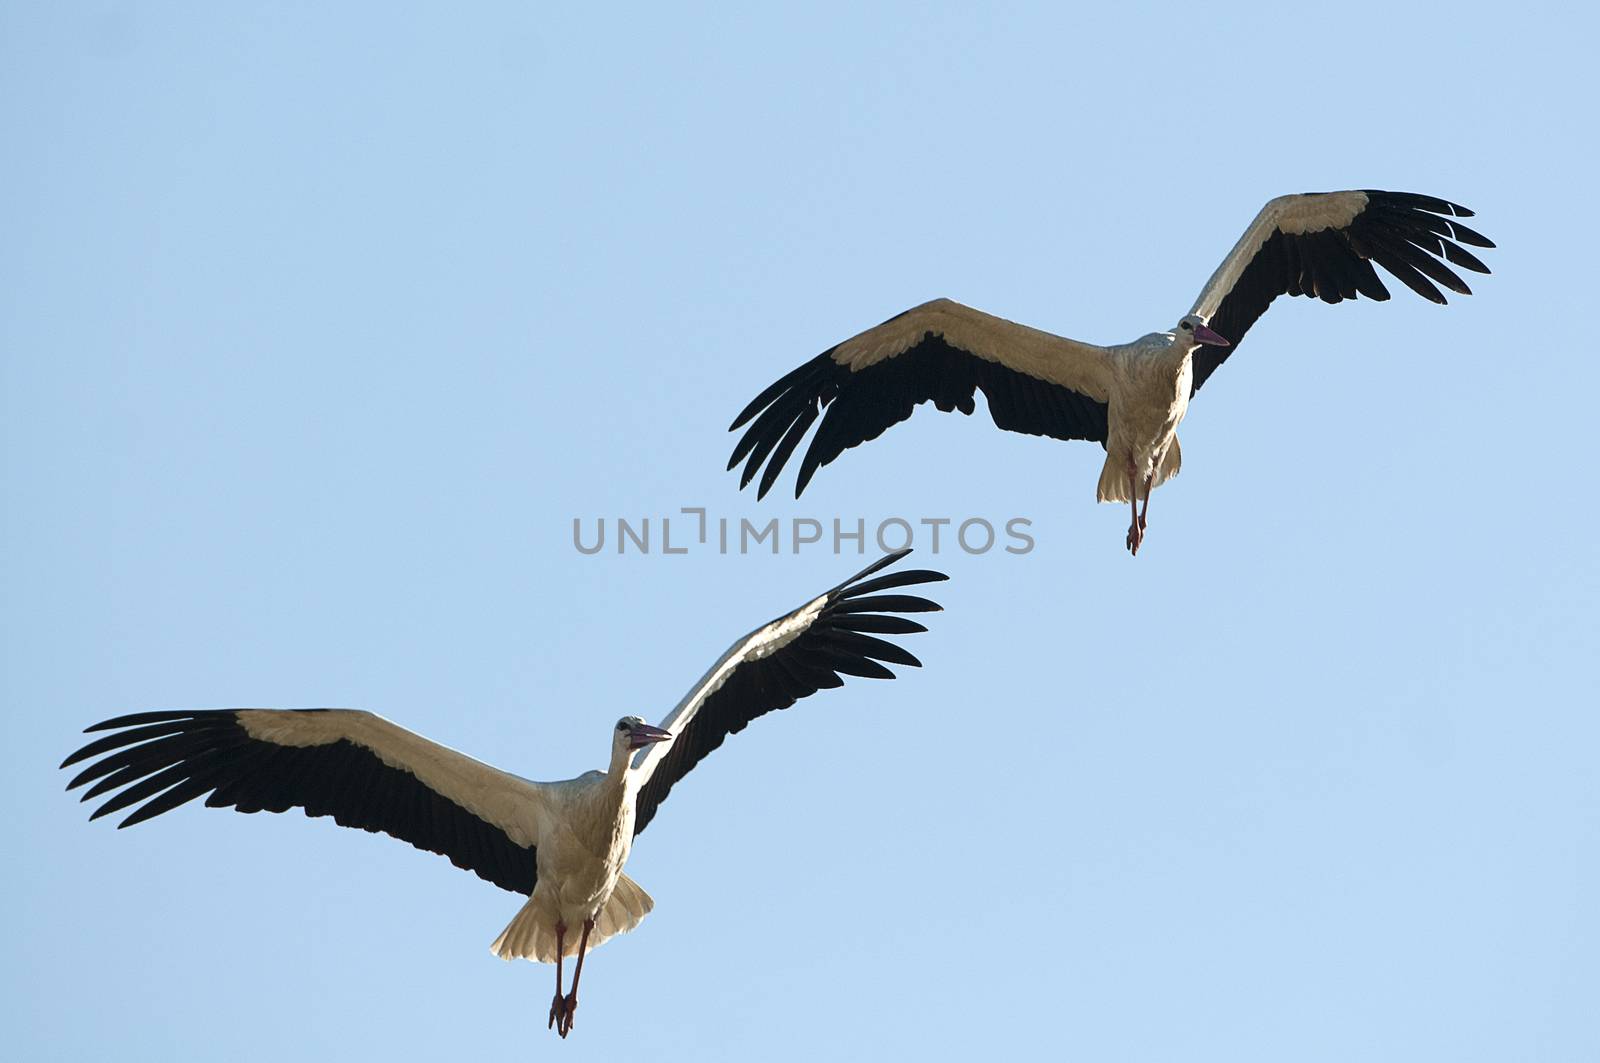 White stork in flight (Ciconia ciconia)  by jalonsohu@gmail.com